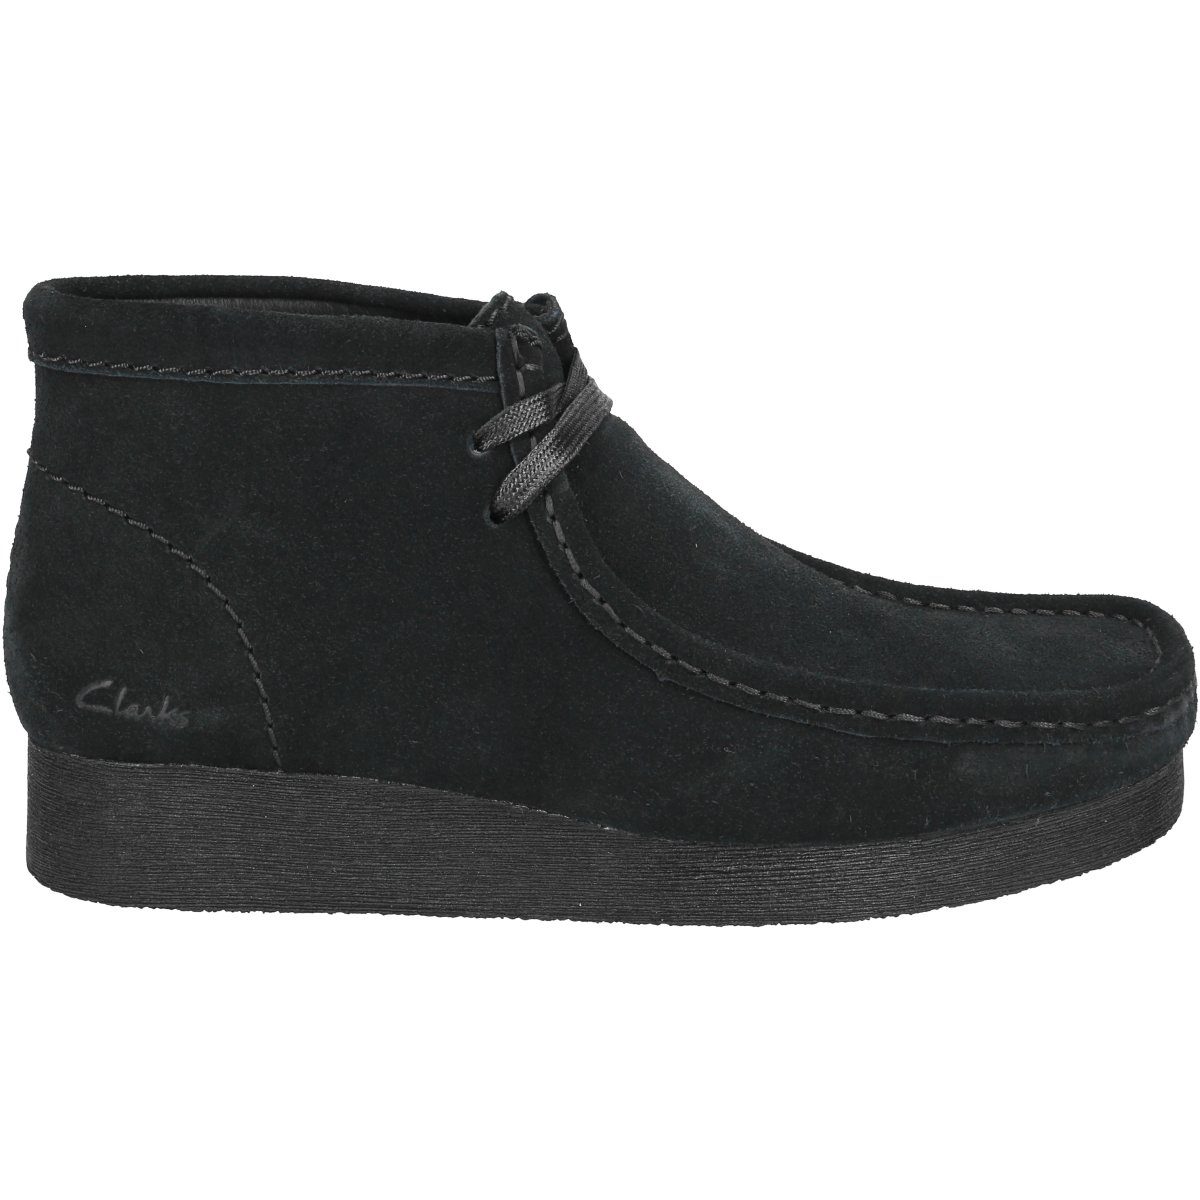 26161529 Wallabee 2 Clarks 4 Stiefel Boot